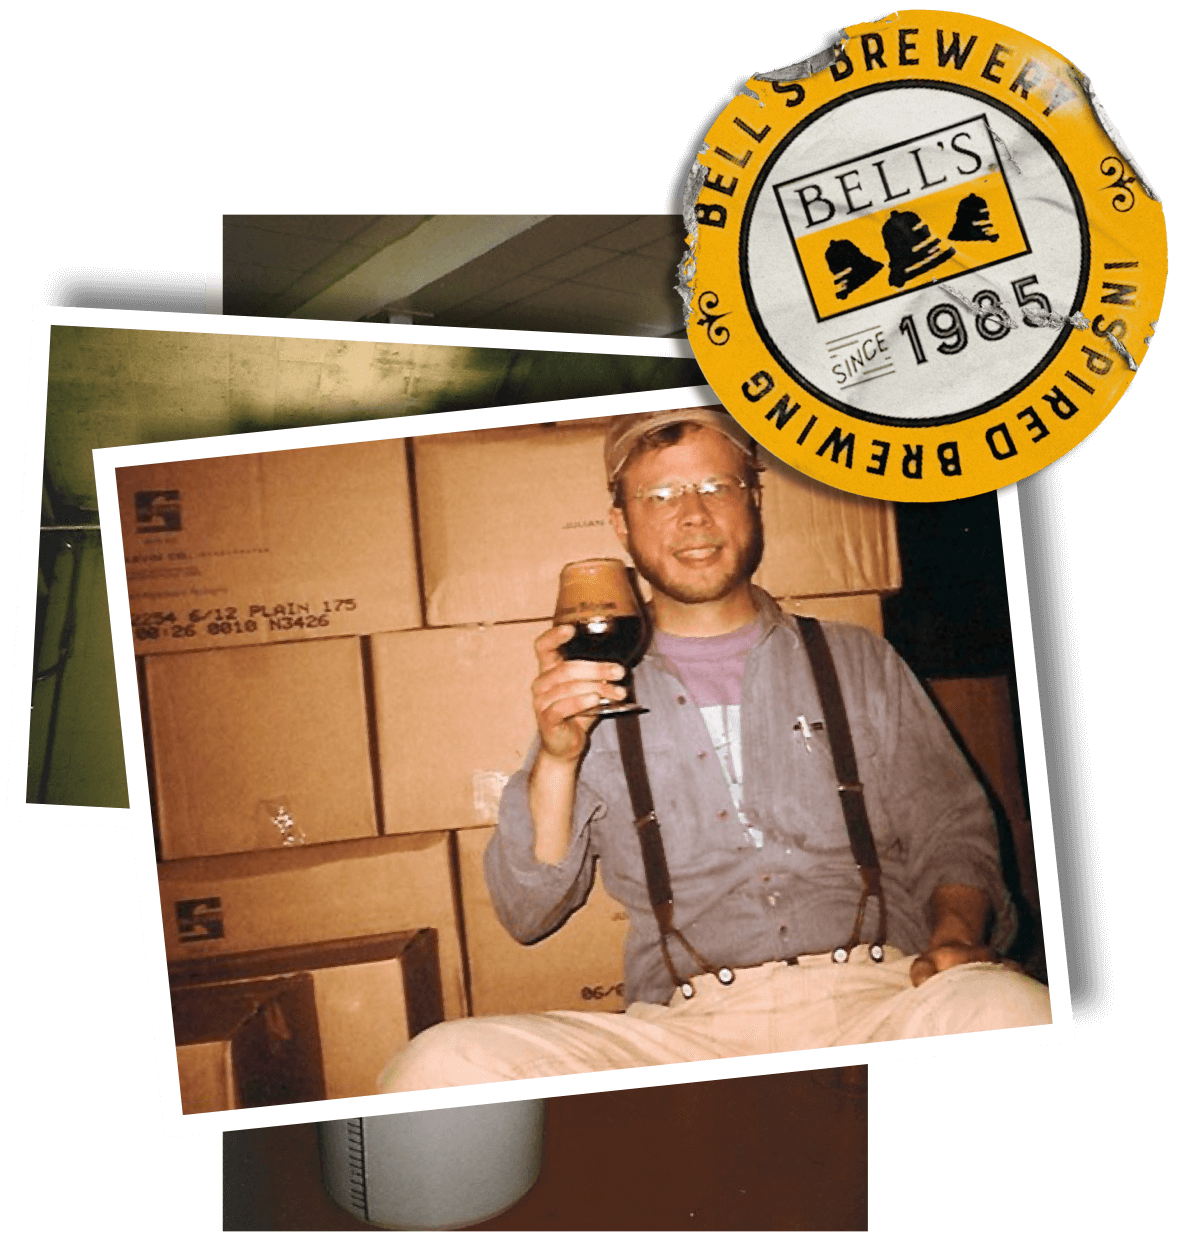 A photo of Larry Bell sitting on cardboard boxes holding a snifter glass full of Amber Ale